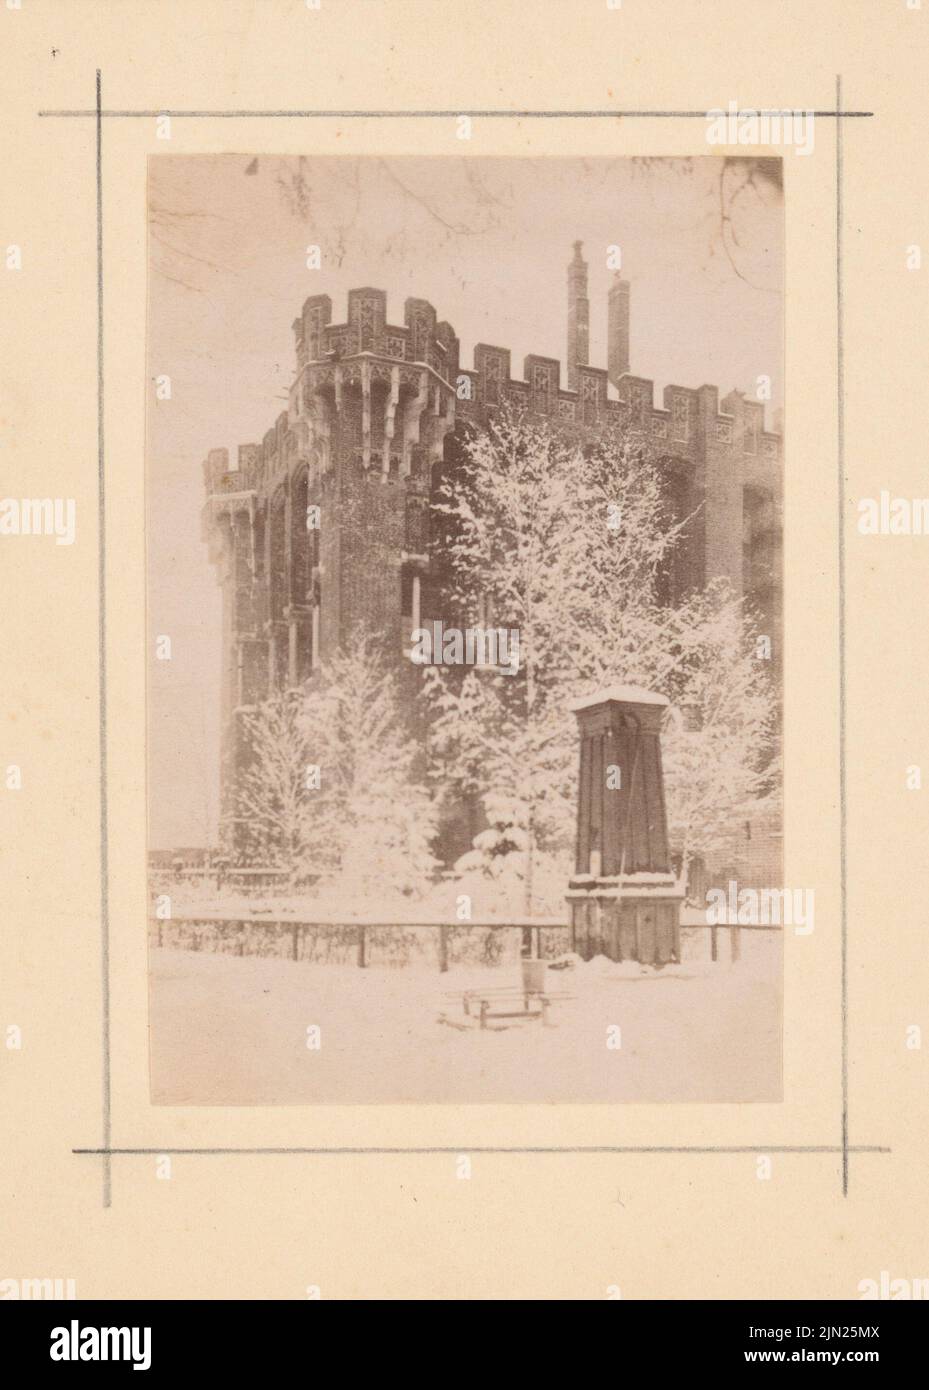 Steinbrecht Conrad (1849-1923), Marienburg, Restoration under Steinbrecht 1882-1918, letters and photos to R. Persius: View of Grand Master Palace. Photo on cardboard, 11.3 x 8.1 cm (including scan edges) Stock Photo